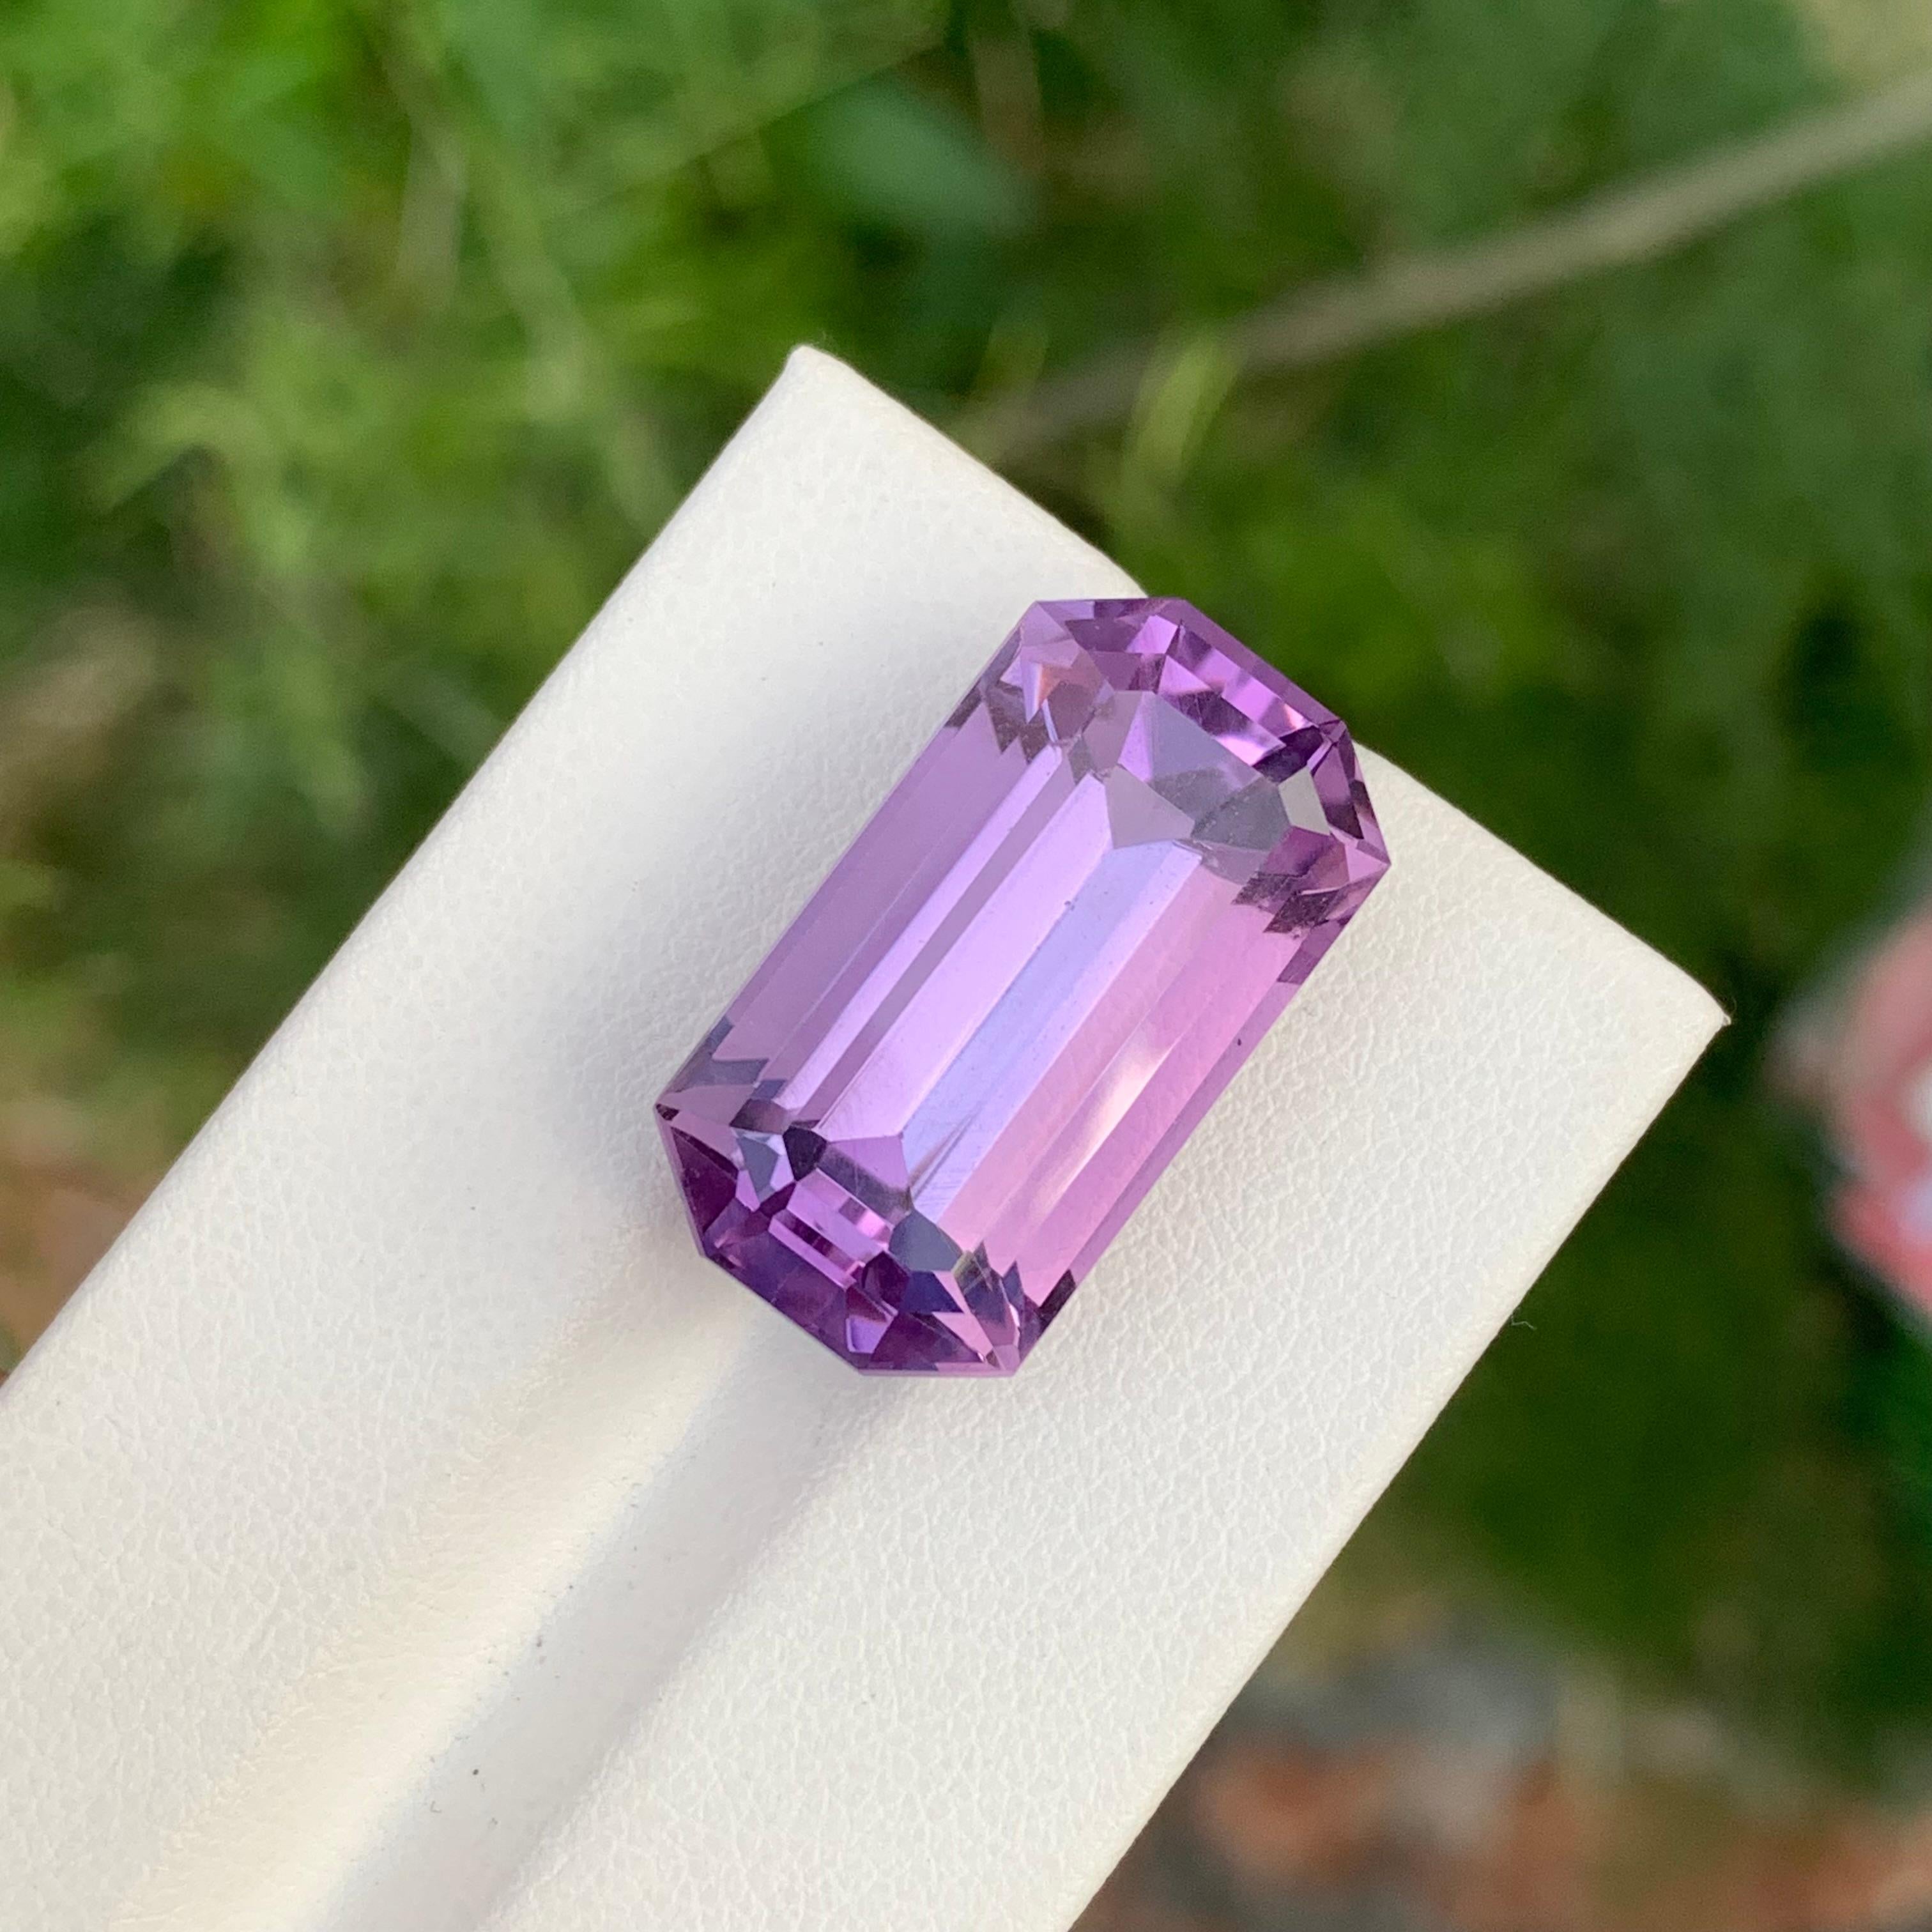 Loose Amethyst
Weight: 23.65 Carats
Dimension: 23 x 12.6 x 11.4 Mm
Colour: Purple
Origin: Brazil
Treatment: Non
Certificate: On Demand
Shape: Emerald 

Amethyst, a stunning variety of quartz known for its mesmerizing purple hue, has captivated